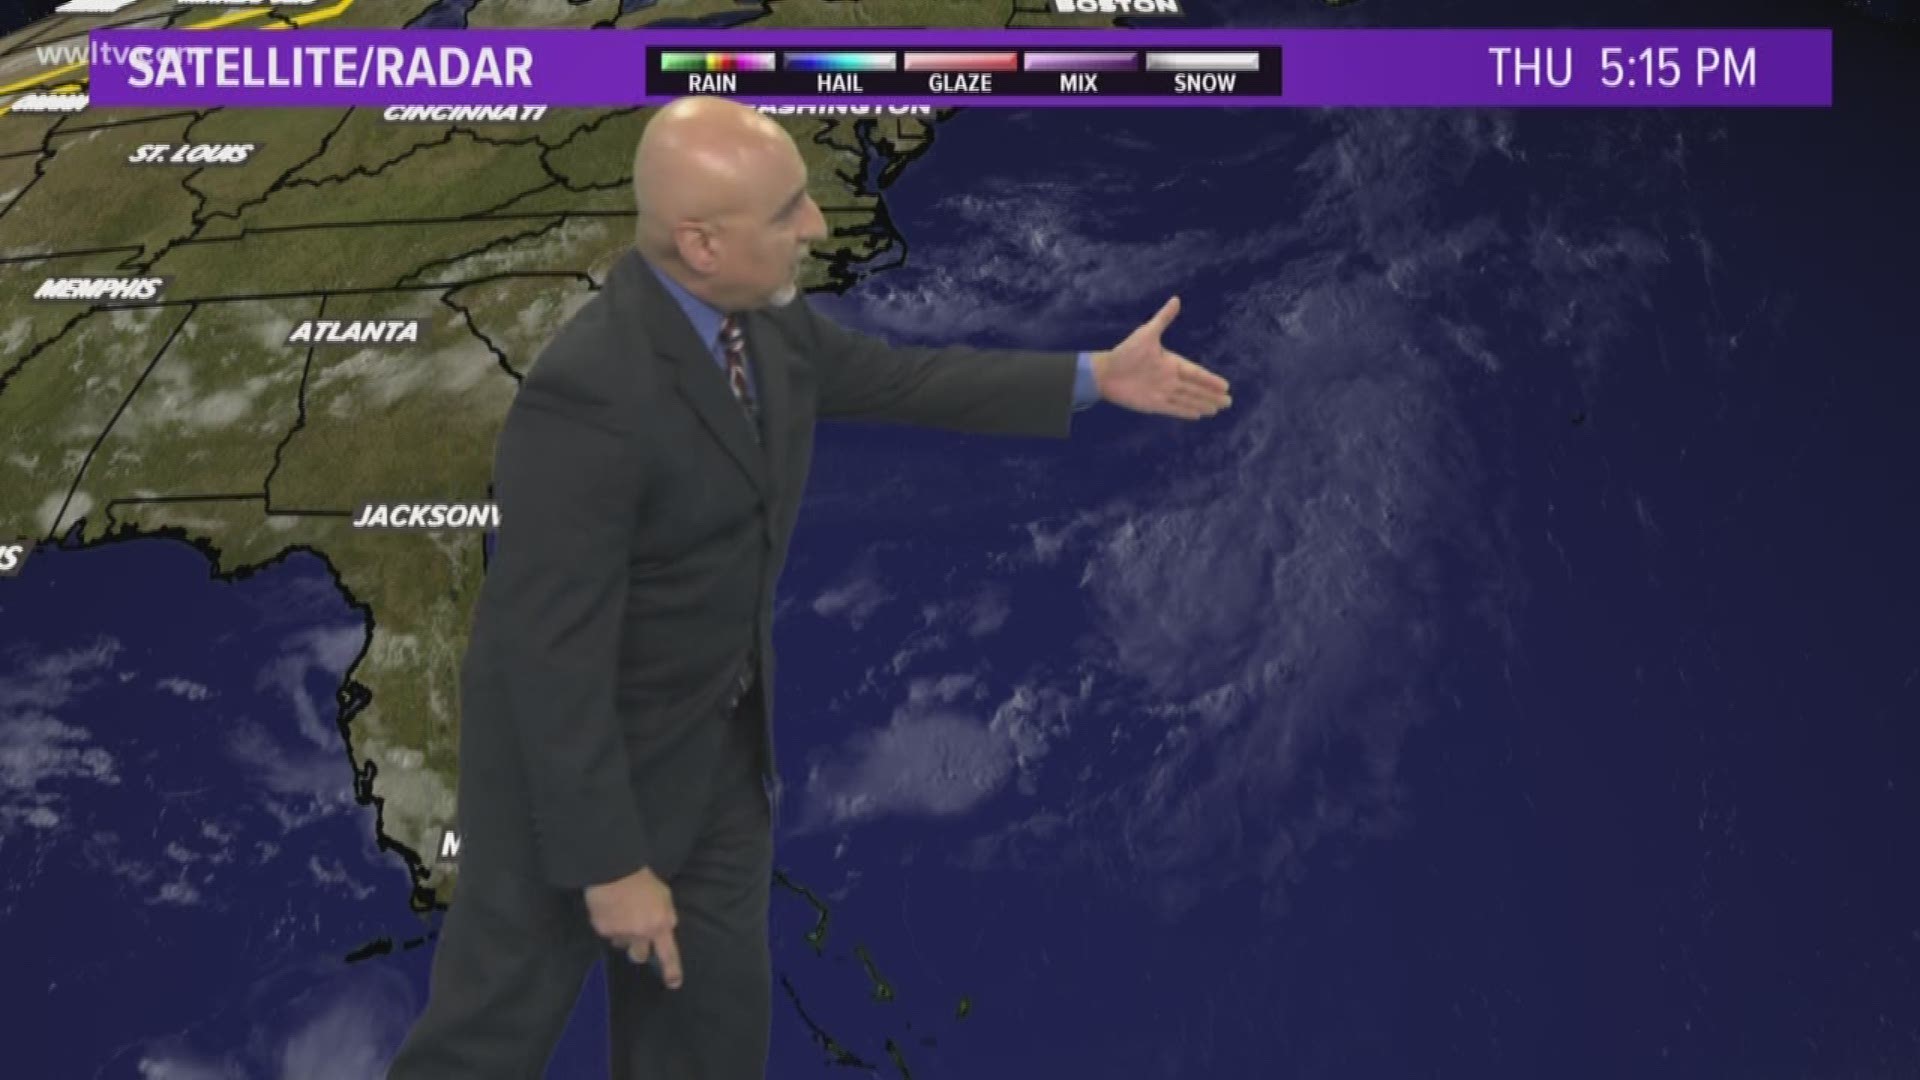 Chief Meteorologist Carl Arredondo and the Thursday evening Tropical Update